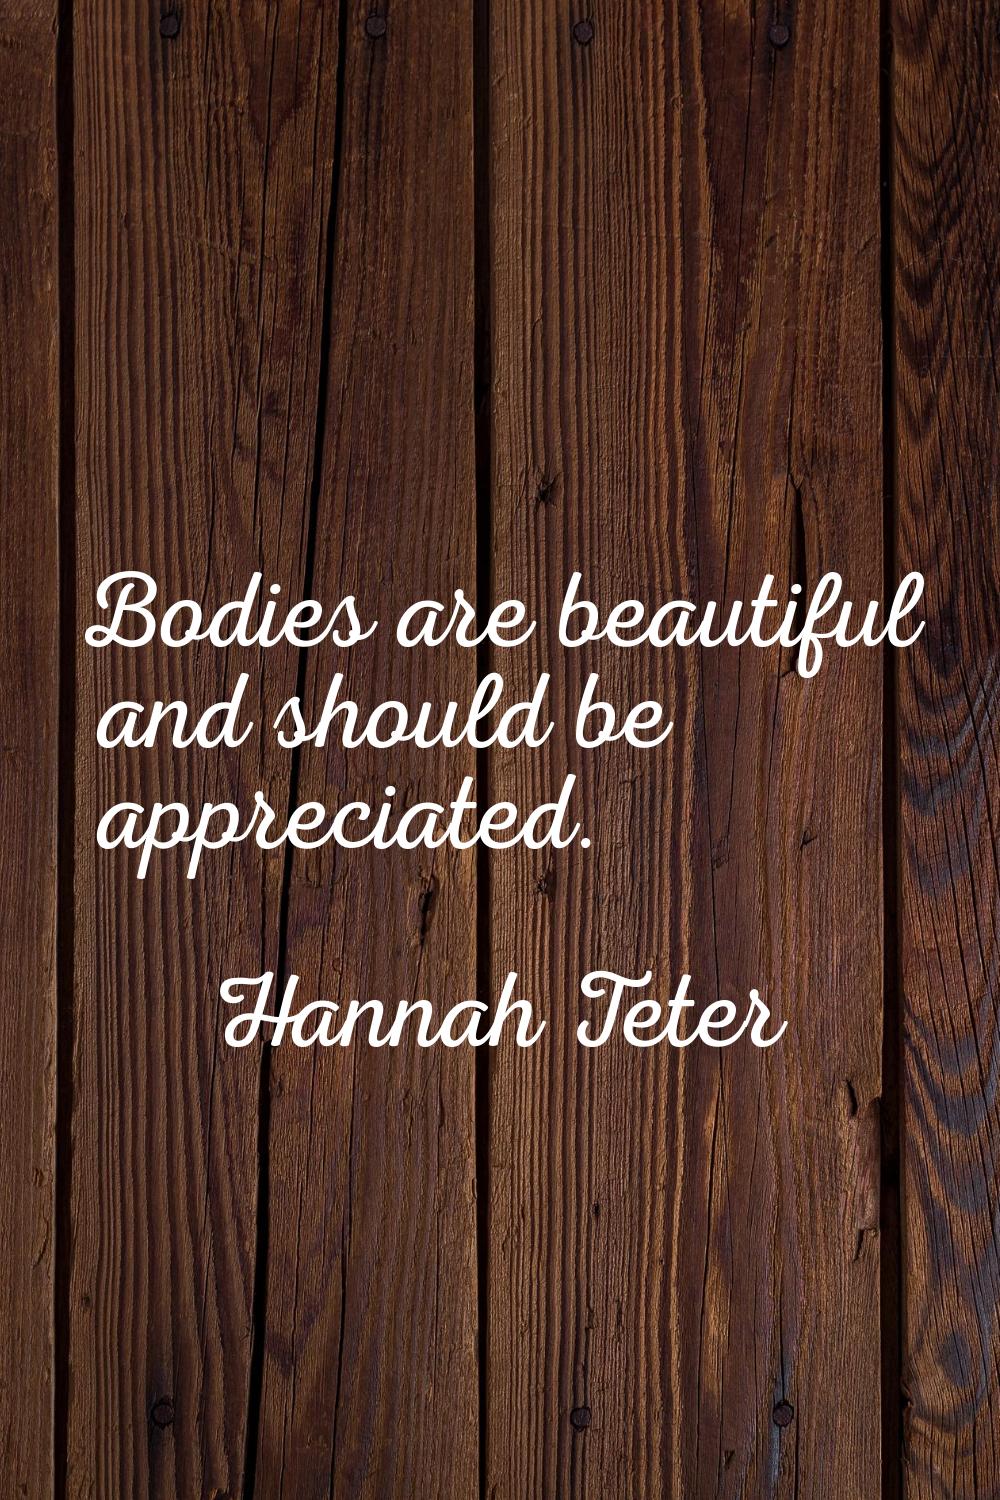 Bodies are beautiful and should be appreciated.